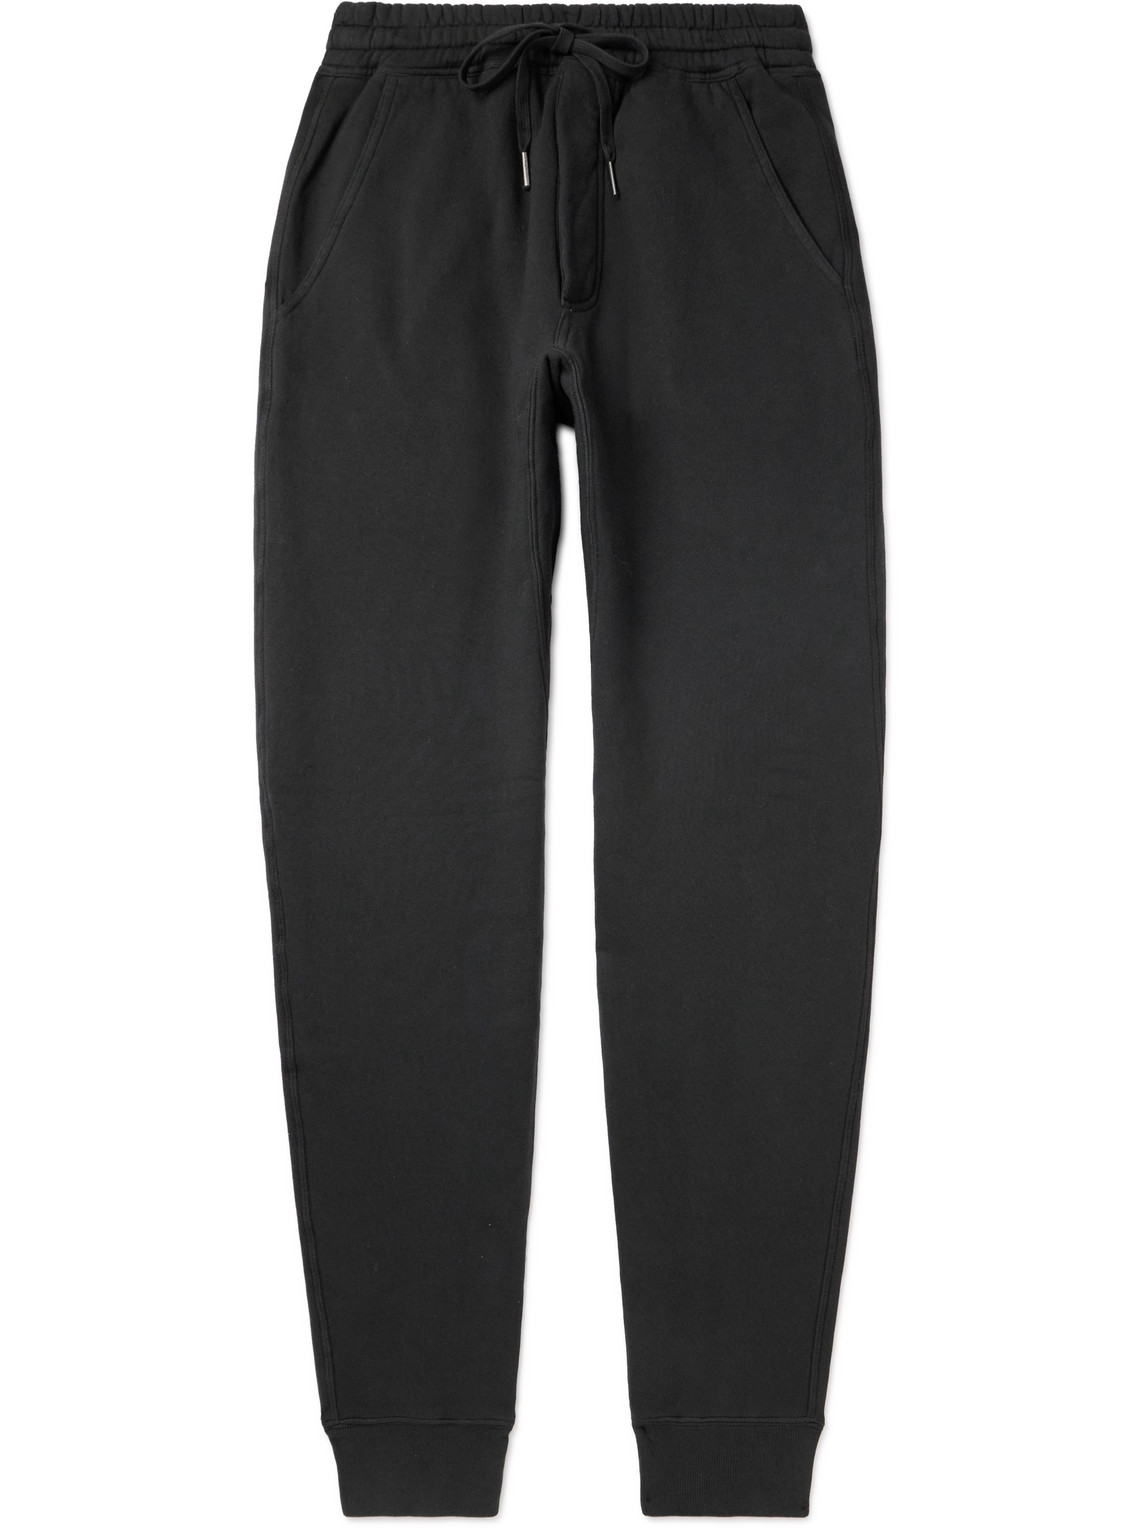 TOM FORD - Tapered Garment-Dyed Cotton-Jersey Sweatpants - Men - Black - IT 48 von TOM FORD